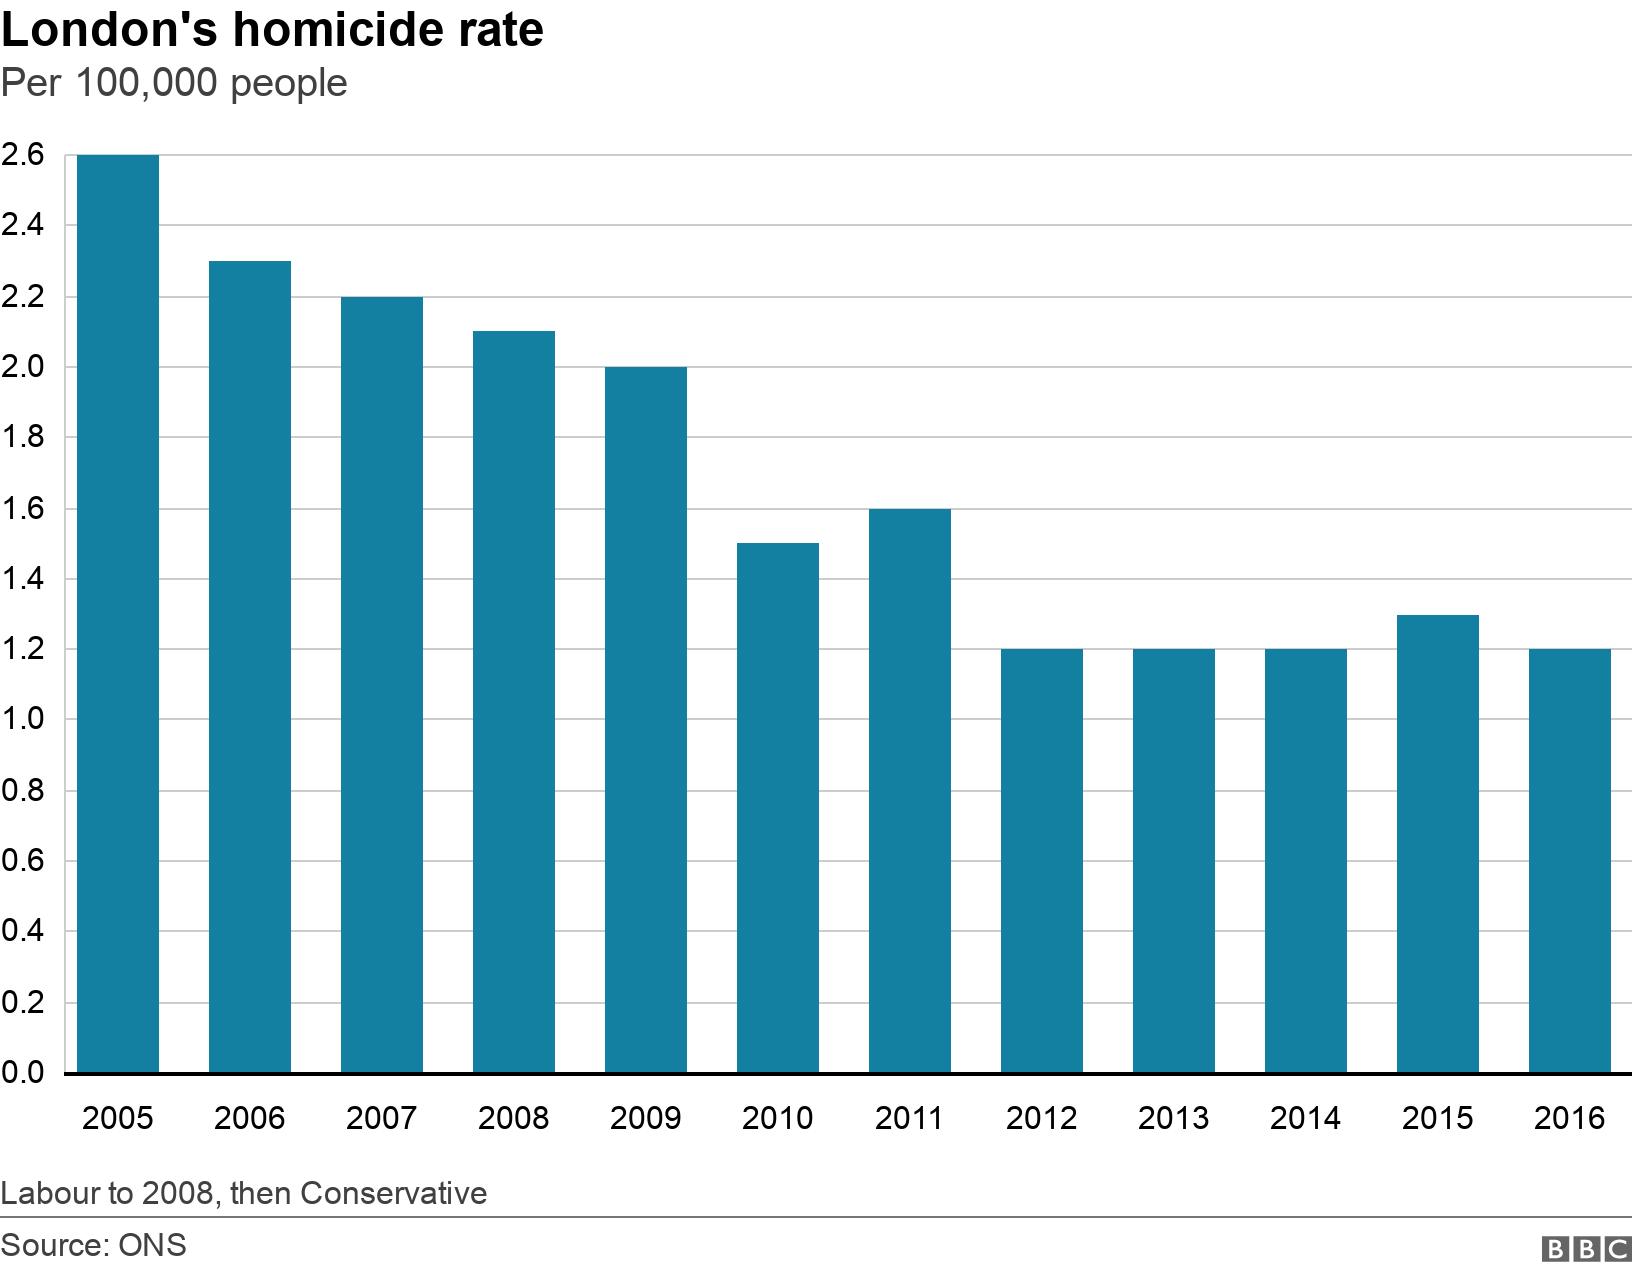 London's homicide rate. Per 100,000 people.  Labour to 2008, then Conservative.